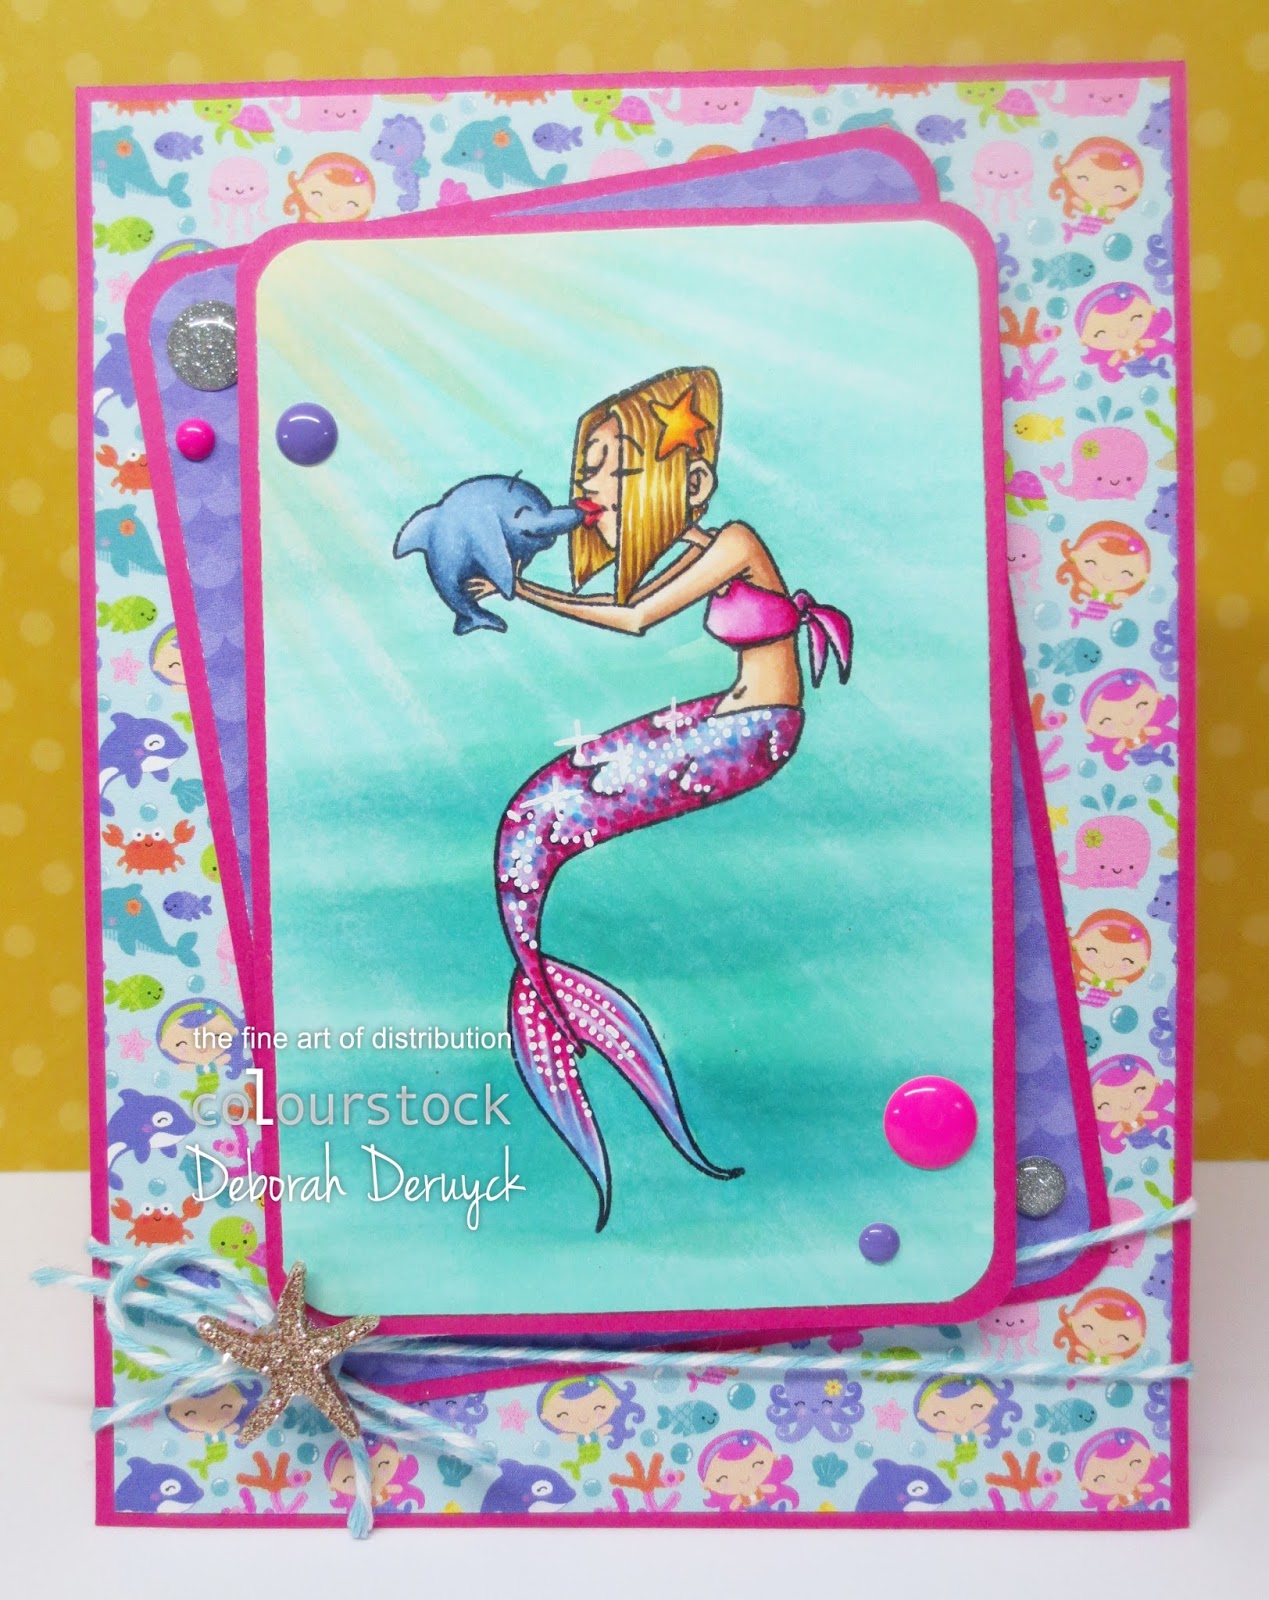 Kraftin' Kimmie Stamps: Underwater background tutorial with Copic markers!